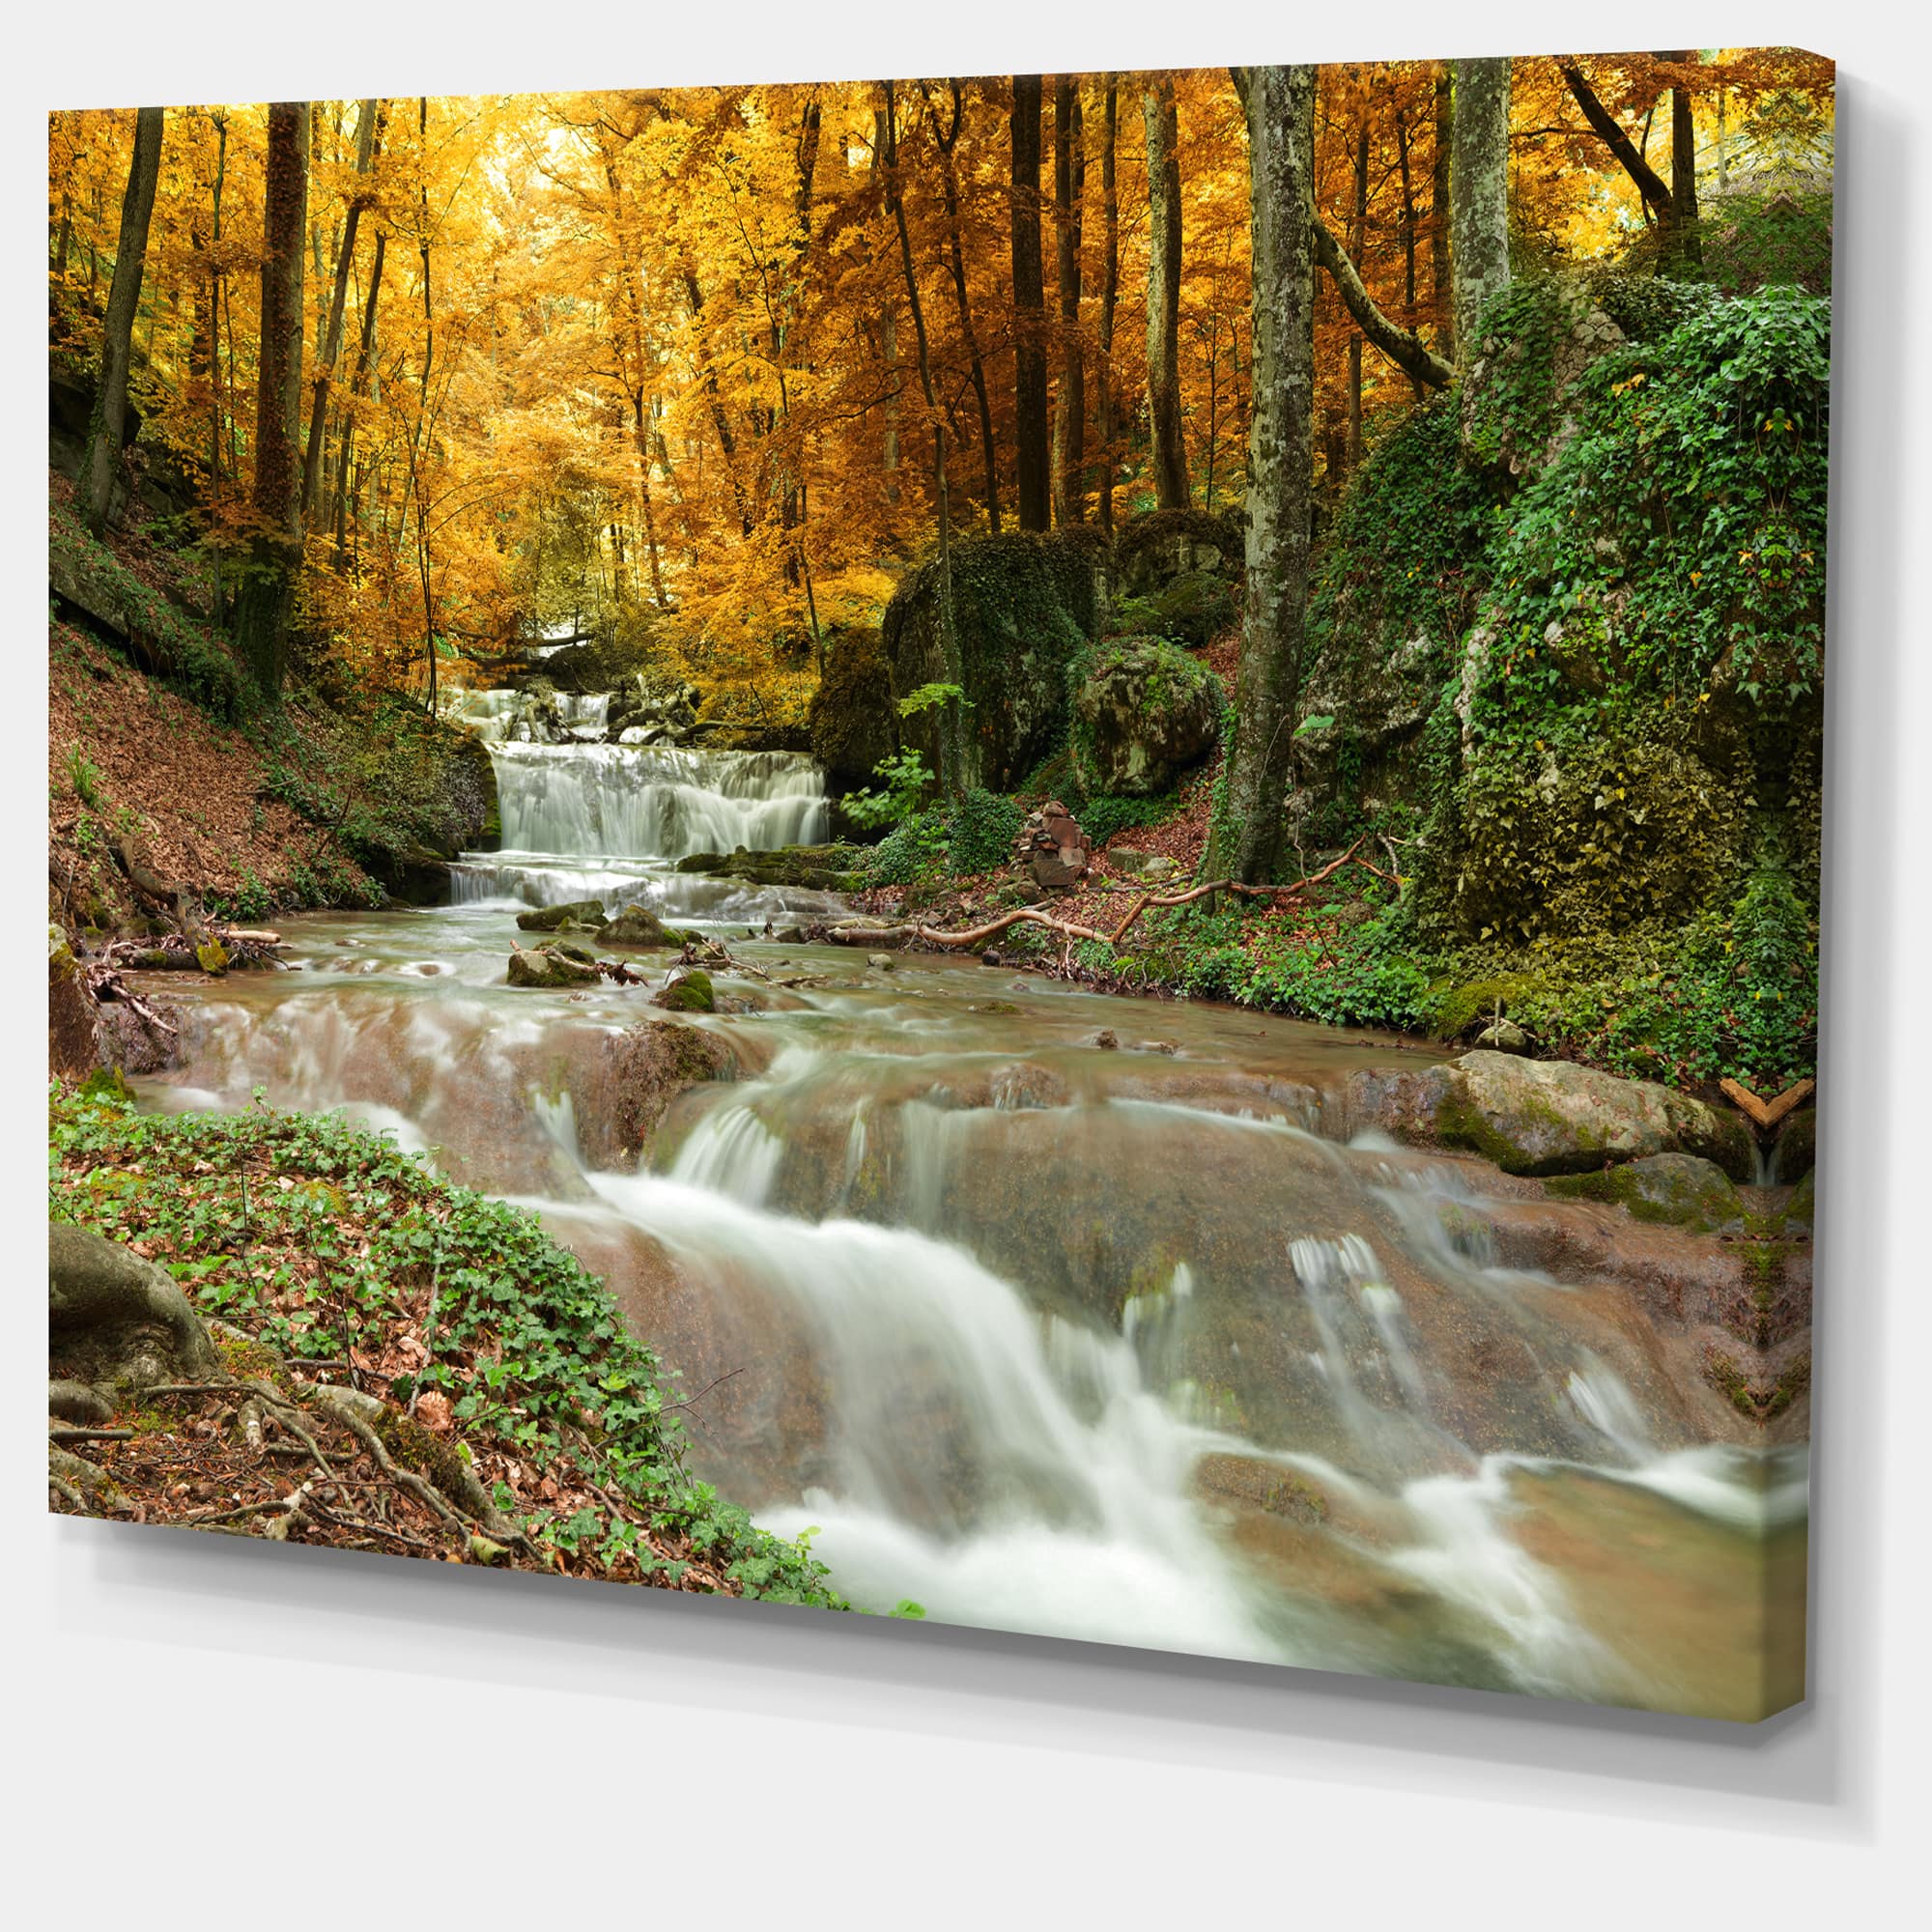 Designart - Forest Waterfall with Yellow Trees - Large Landscape Canvas Art Print